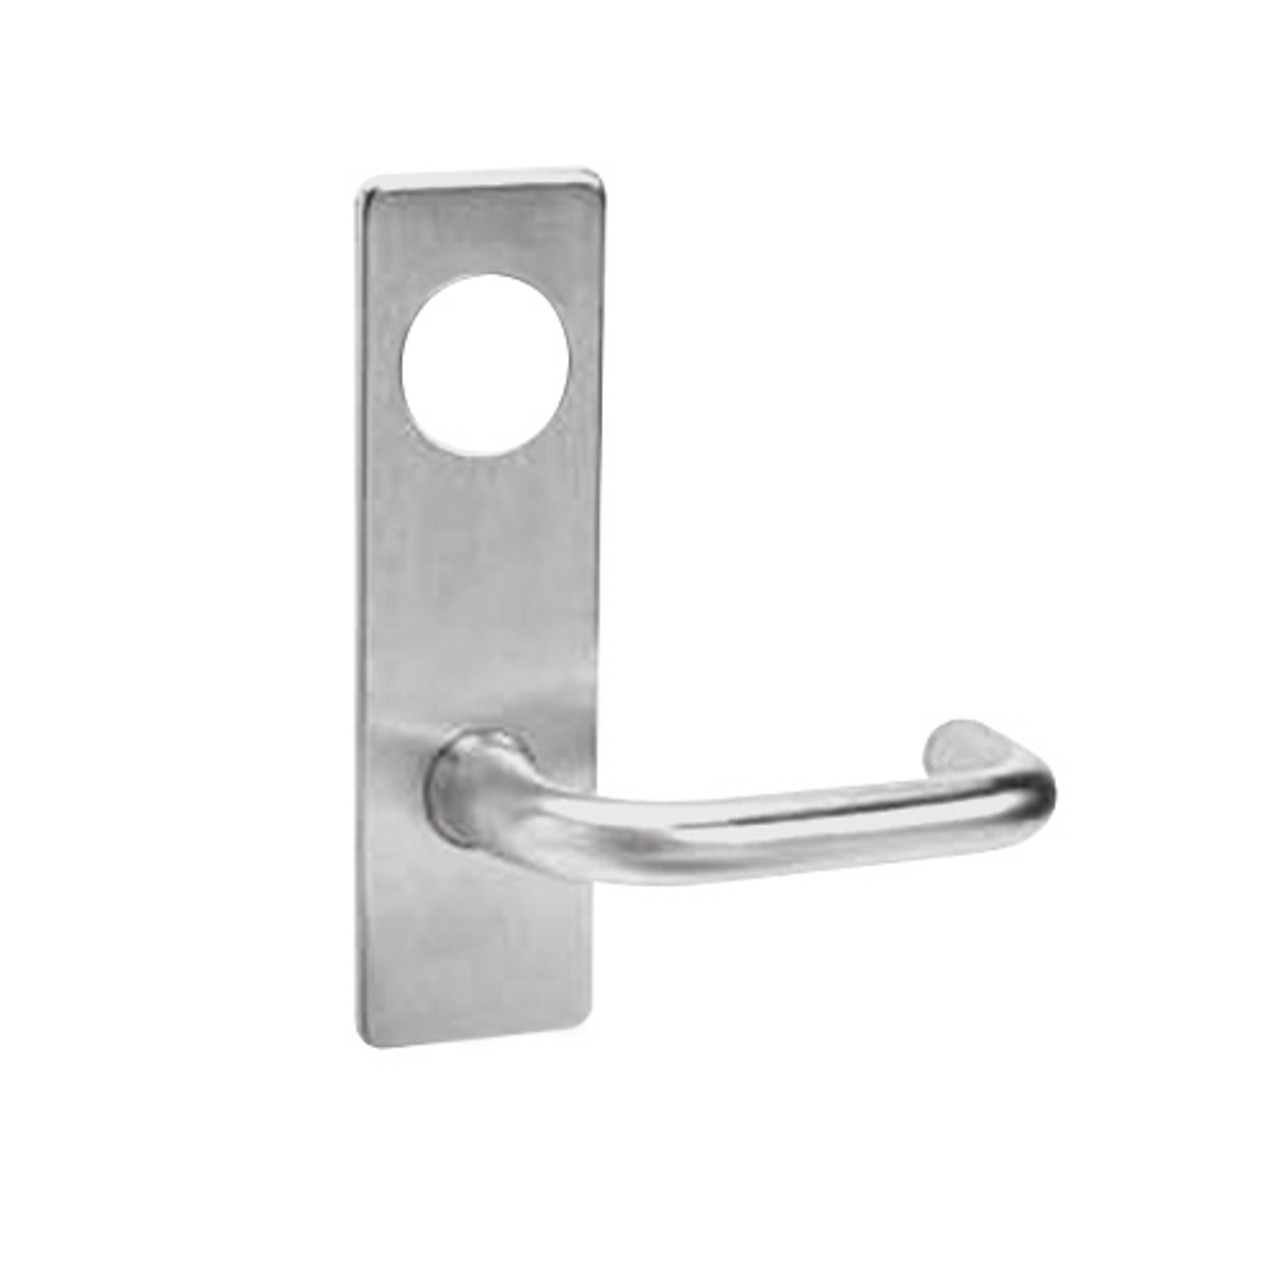 ML2022-LSR-630-CL7 Corbin Russwin ML2000 Series IC 7-Pin Less Core Mortise Store Door Locksets with Lustra Lever with Deadbolt in Satin Stainless